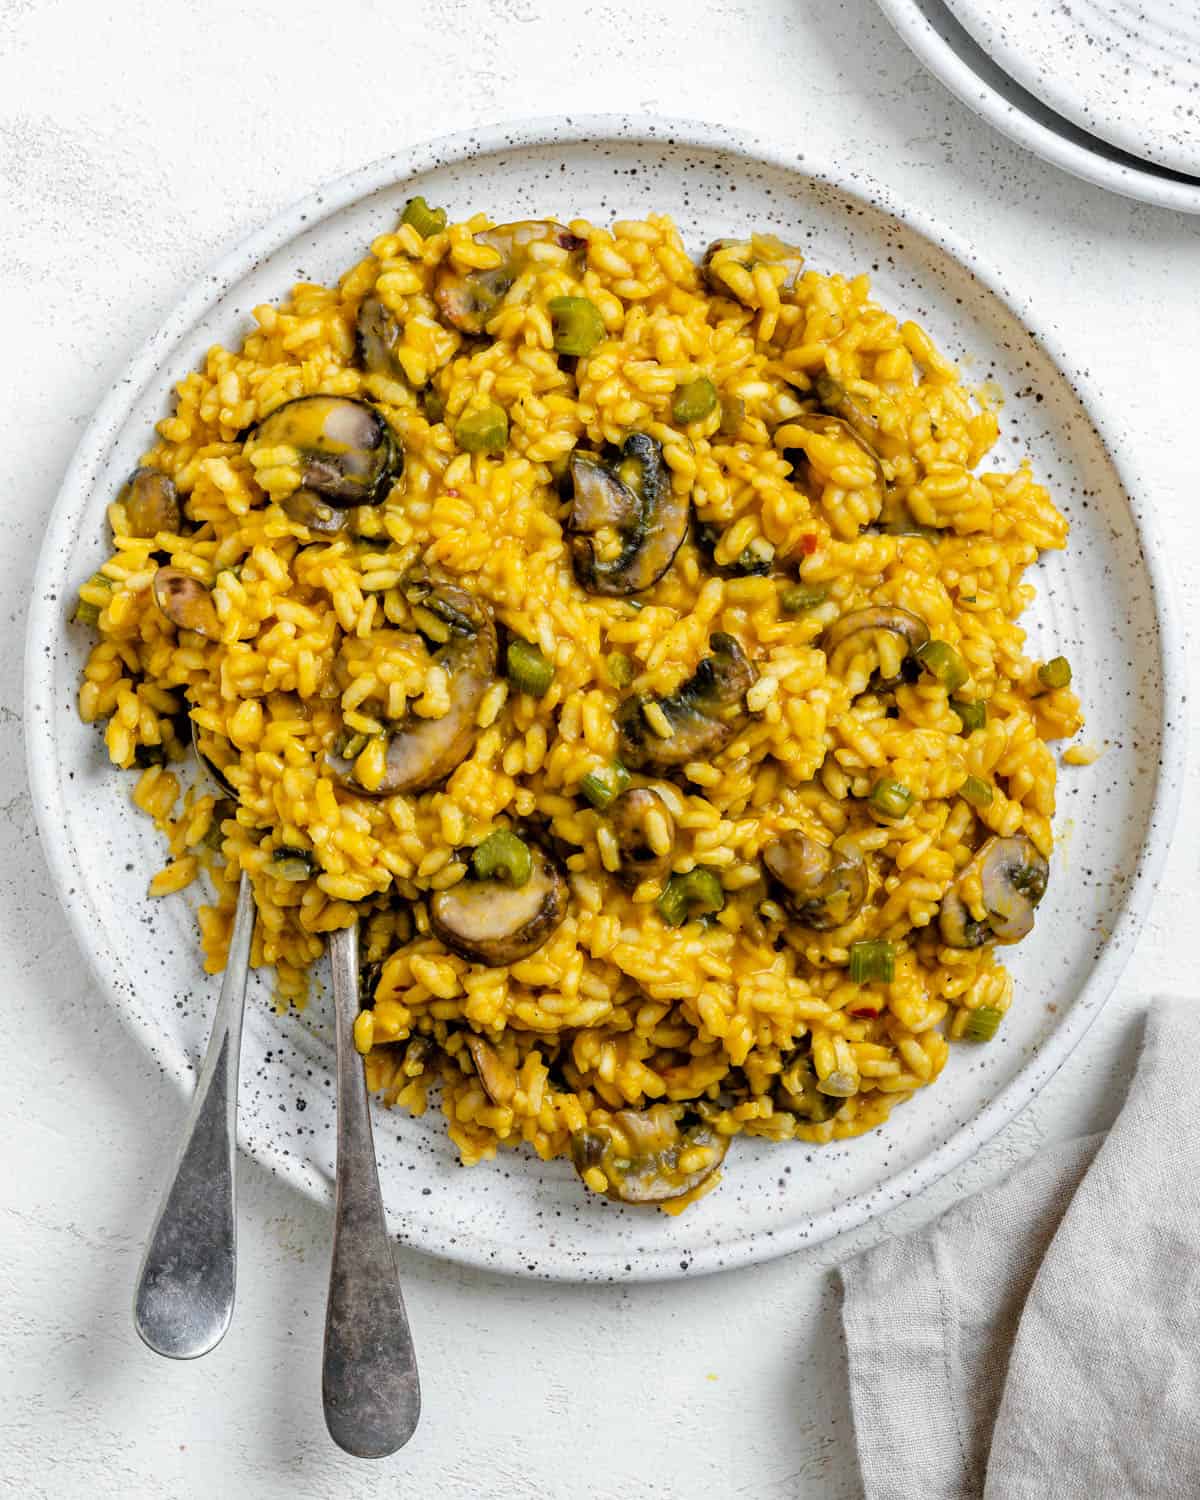 This Simple Pumpkin Risotto is a delicious weekend dinner option! It's creamy, full of yummy fall flavors, but is perfect to enjoy year round! #plantbasedonabudget #pumpkin #risotto #vegan.